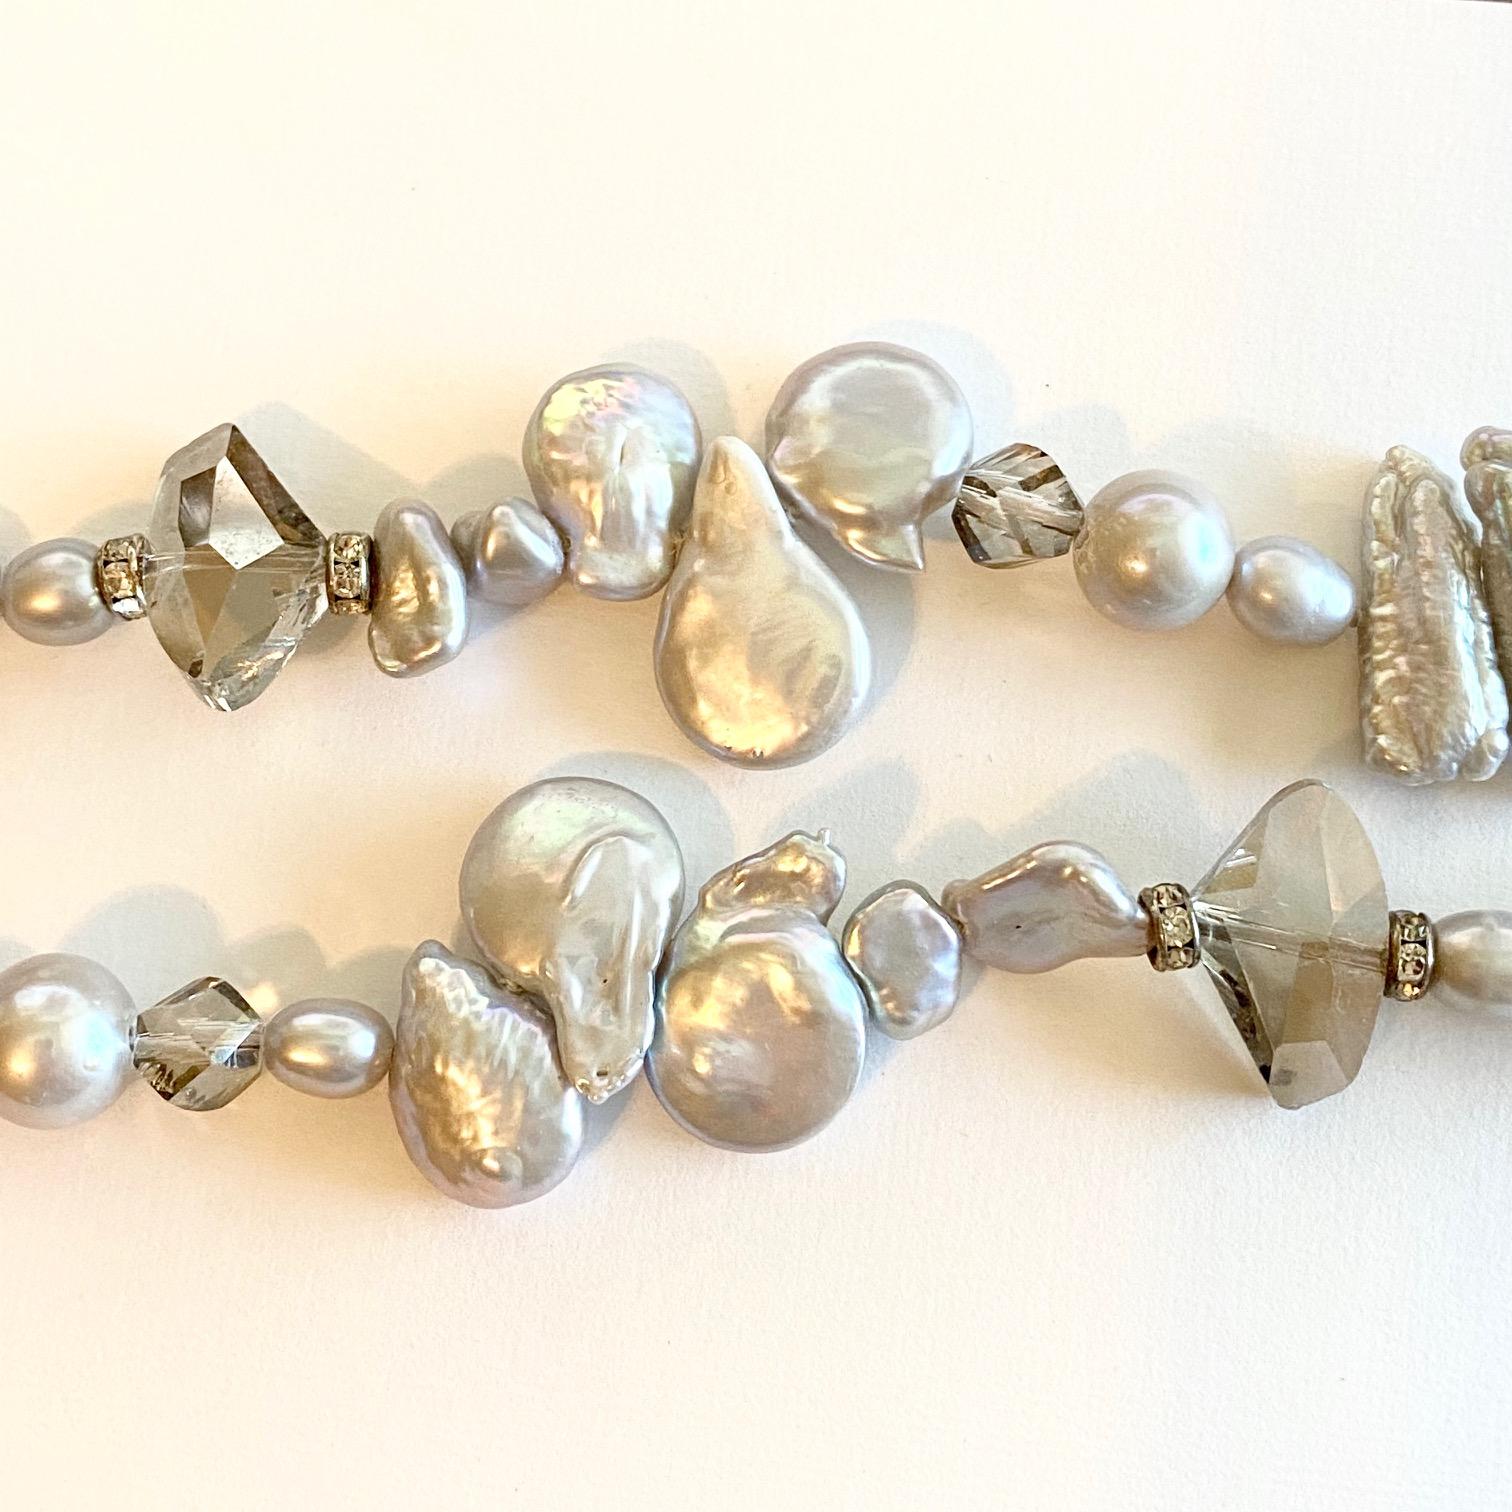 If you like genuine, cultured pearls and have a fun, unique style and love quality-this necklace is for you!! It has gorgeous, genuine, baroque pearls all around it with faceted genuine quartz beads! This gray pearls have a rich creamy color with